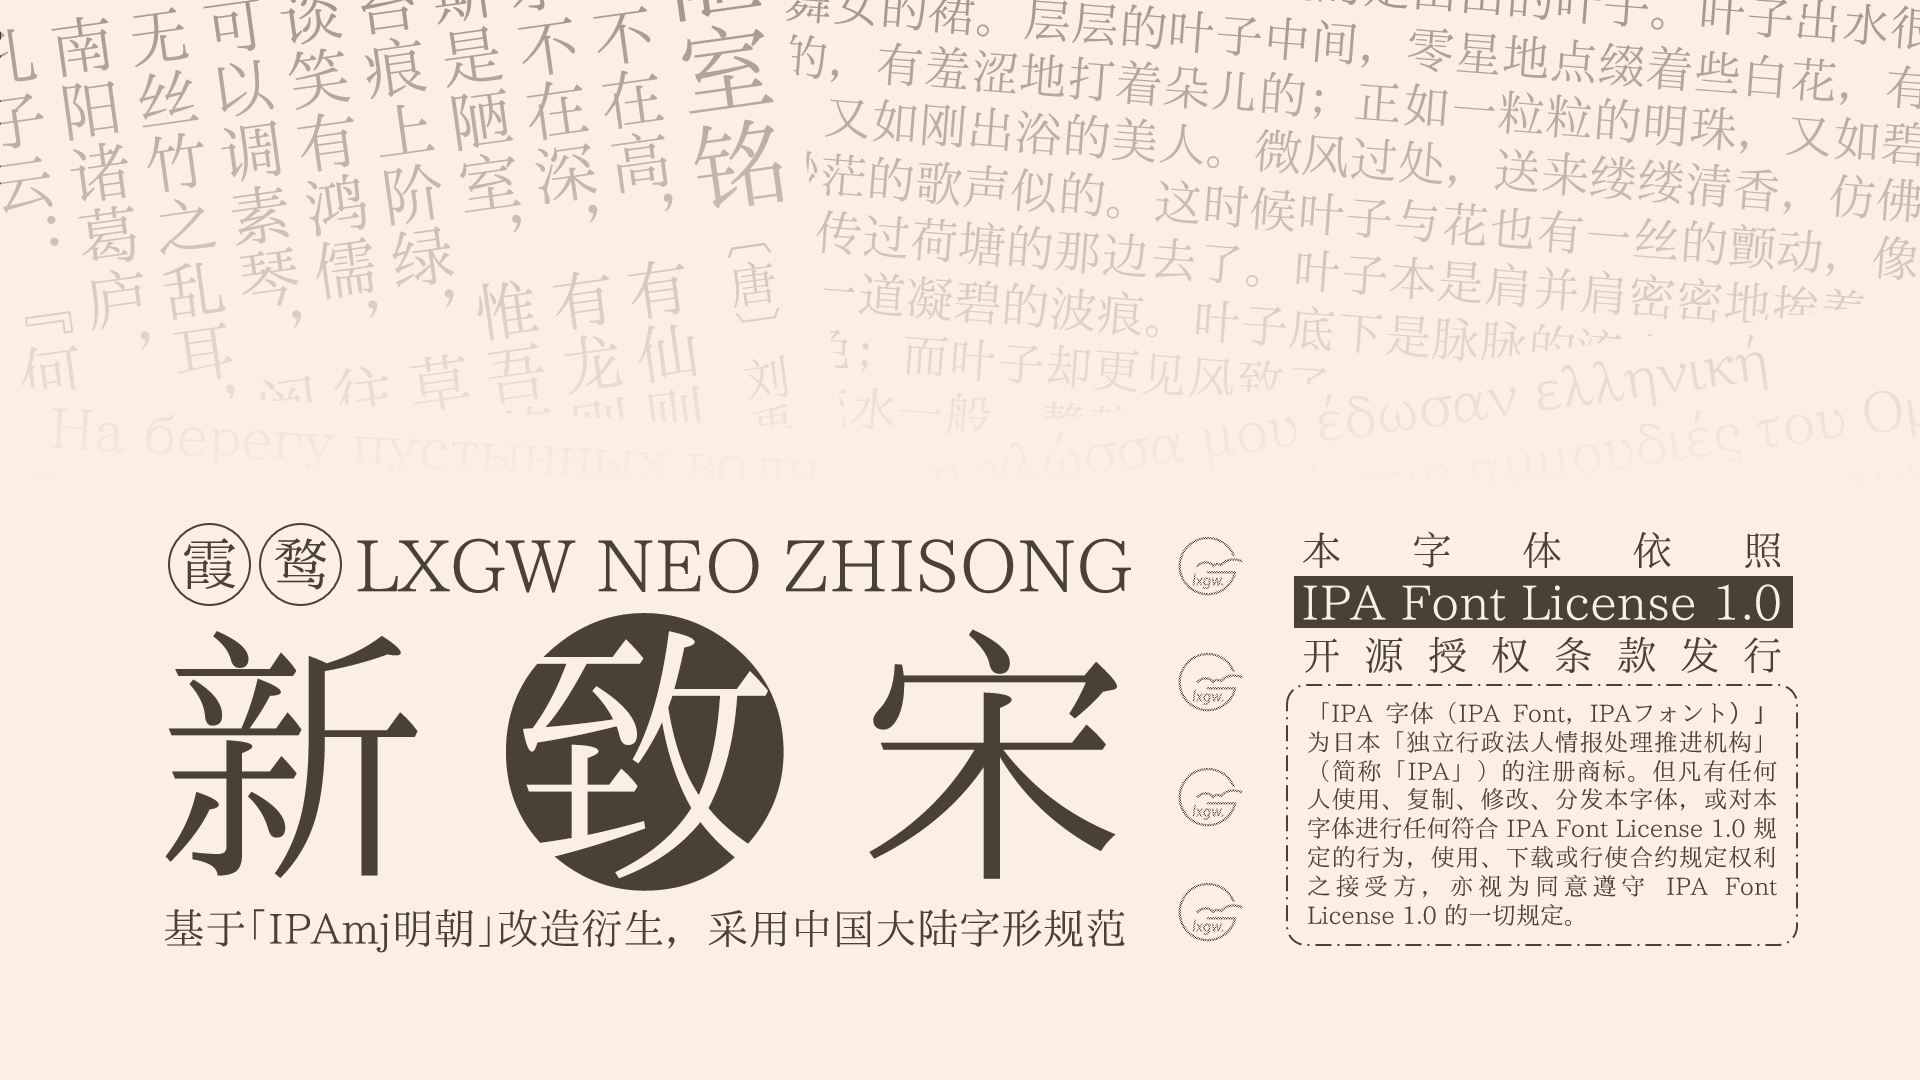 LXGW Heart Serif CY Beta Chinese Font Free commercial use